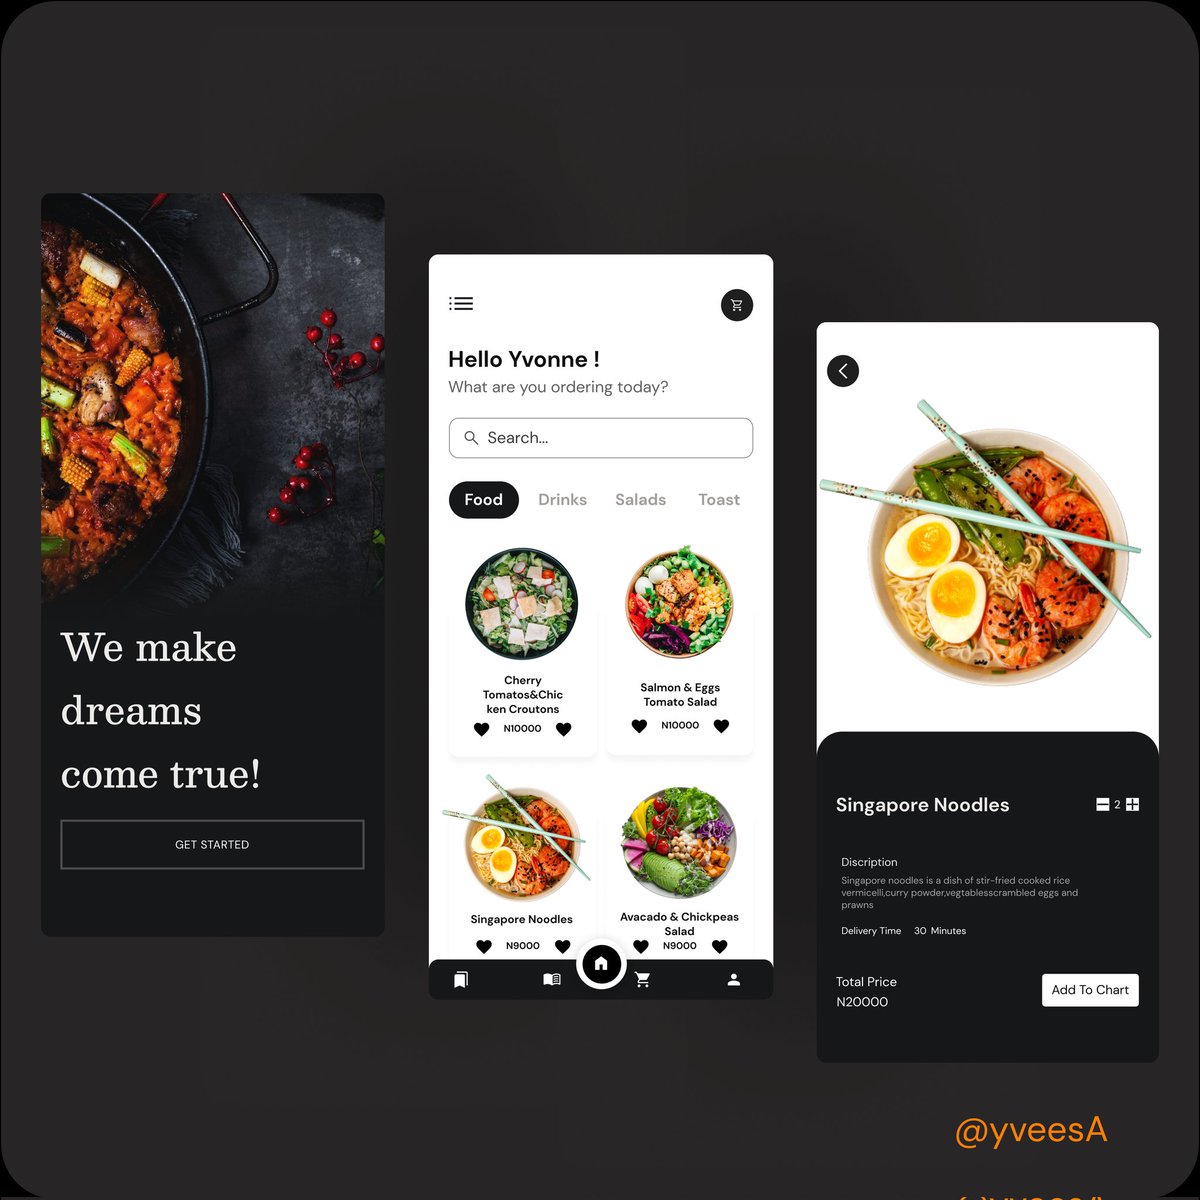 Finally coming out of my shell and getting rid of imposter syndrome. Taking the bold step to post some of my designs. 

A Menu ordering App.
.
Your honest reviews are welcome
#uidailychallenge#uiuxdesign